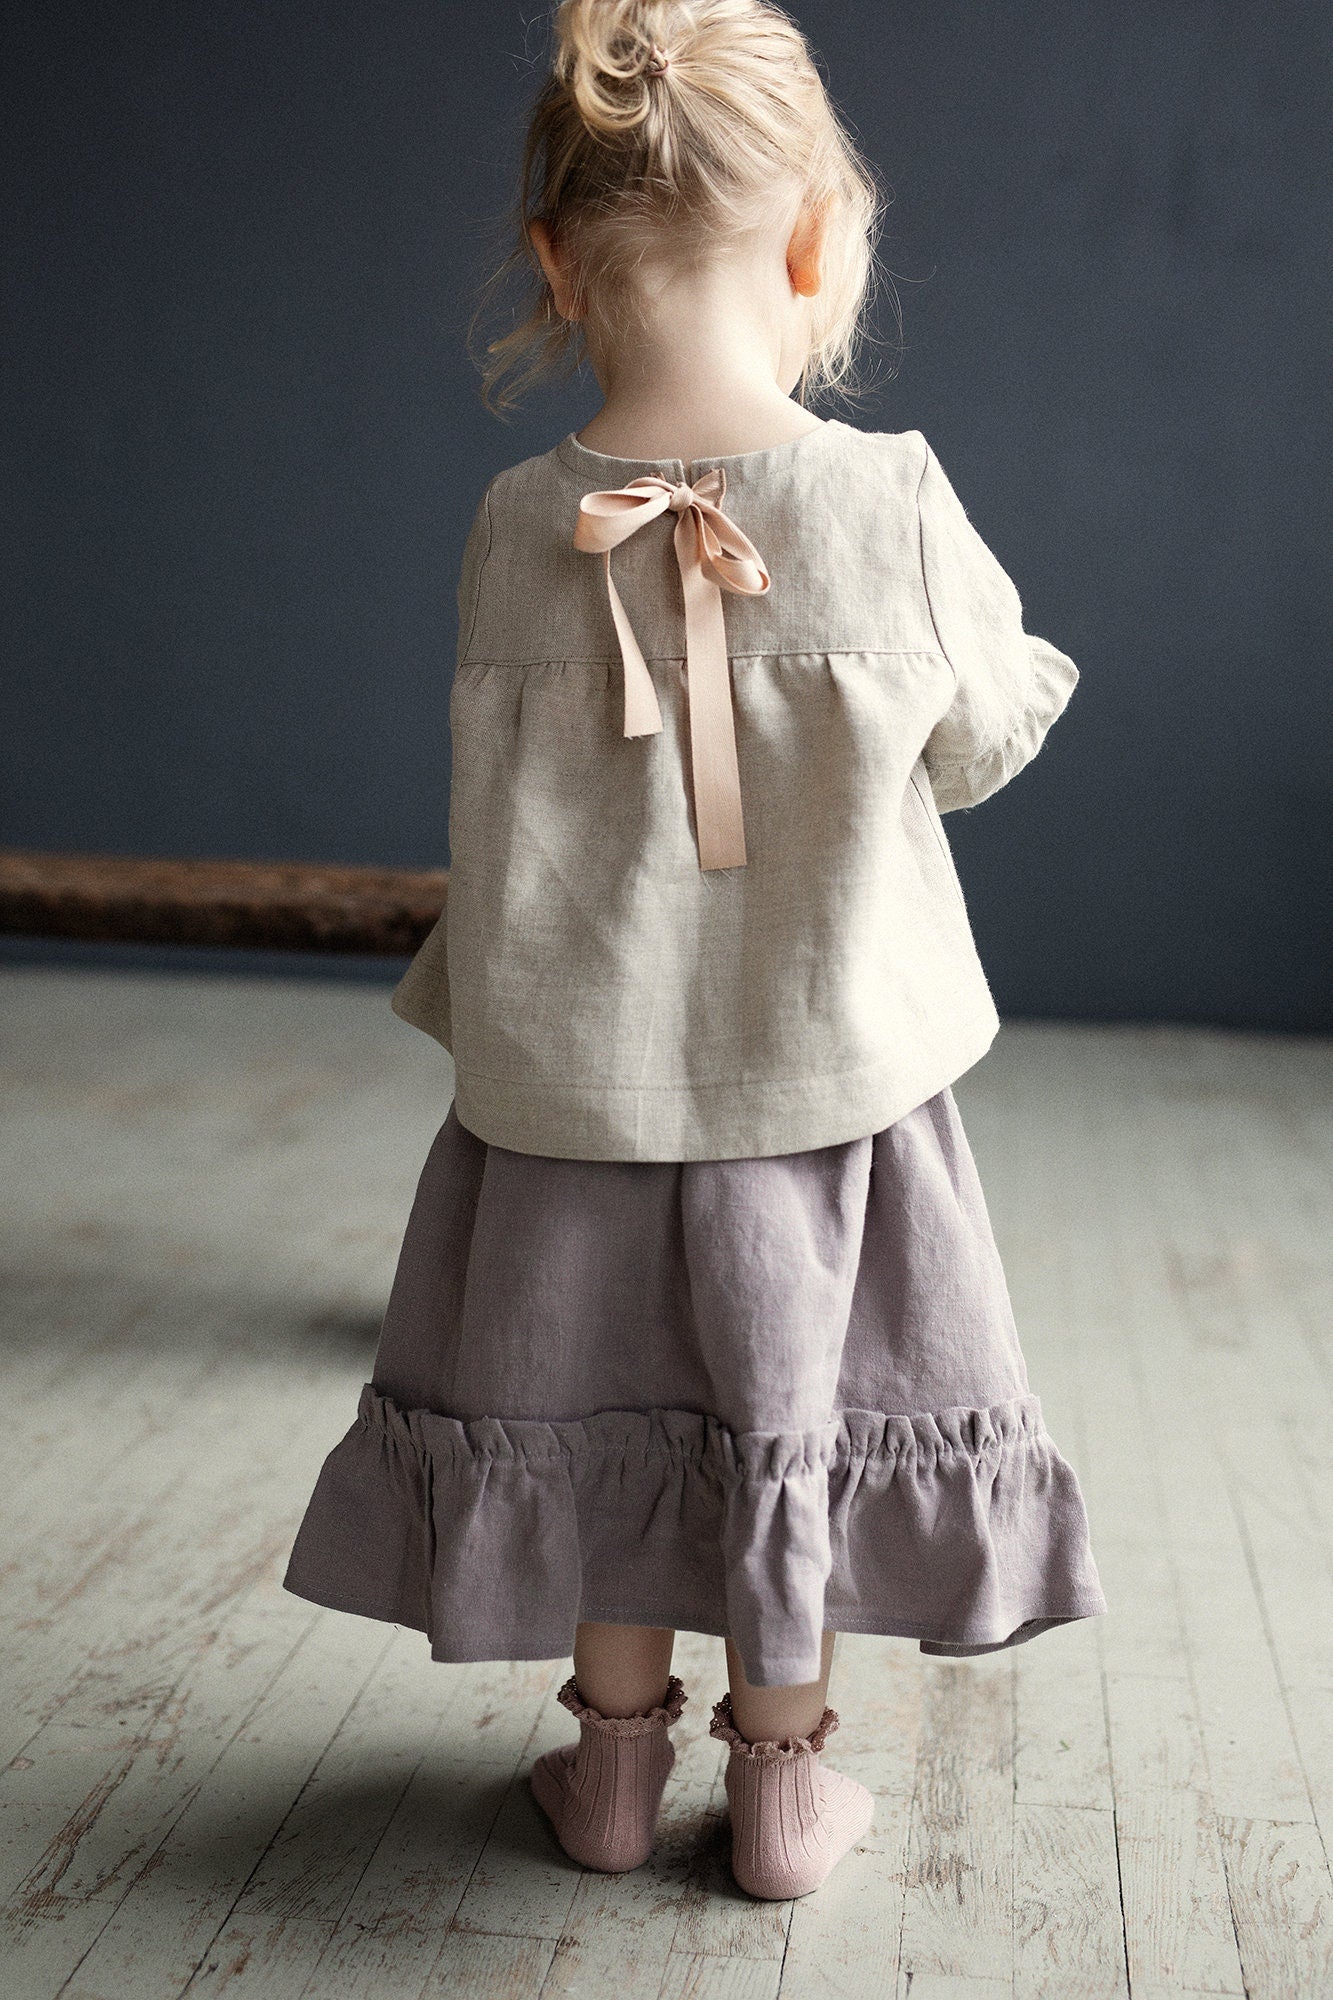 Natural Short  Linen Tunic, Size 1-2 years, Cherry blossom embroidery